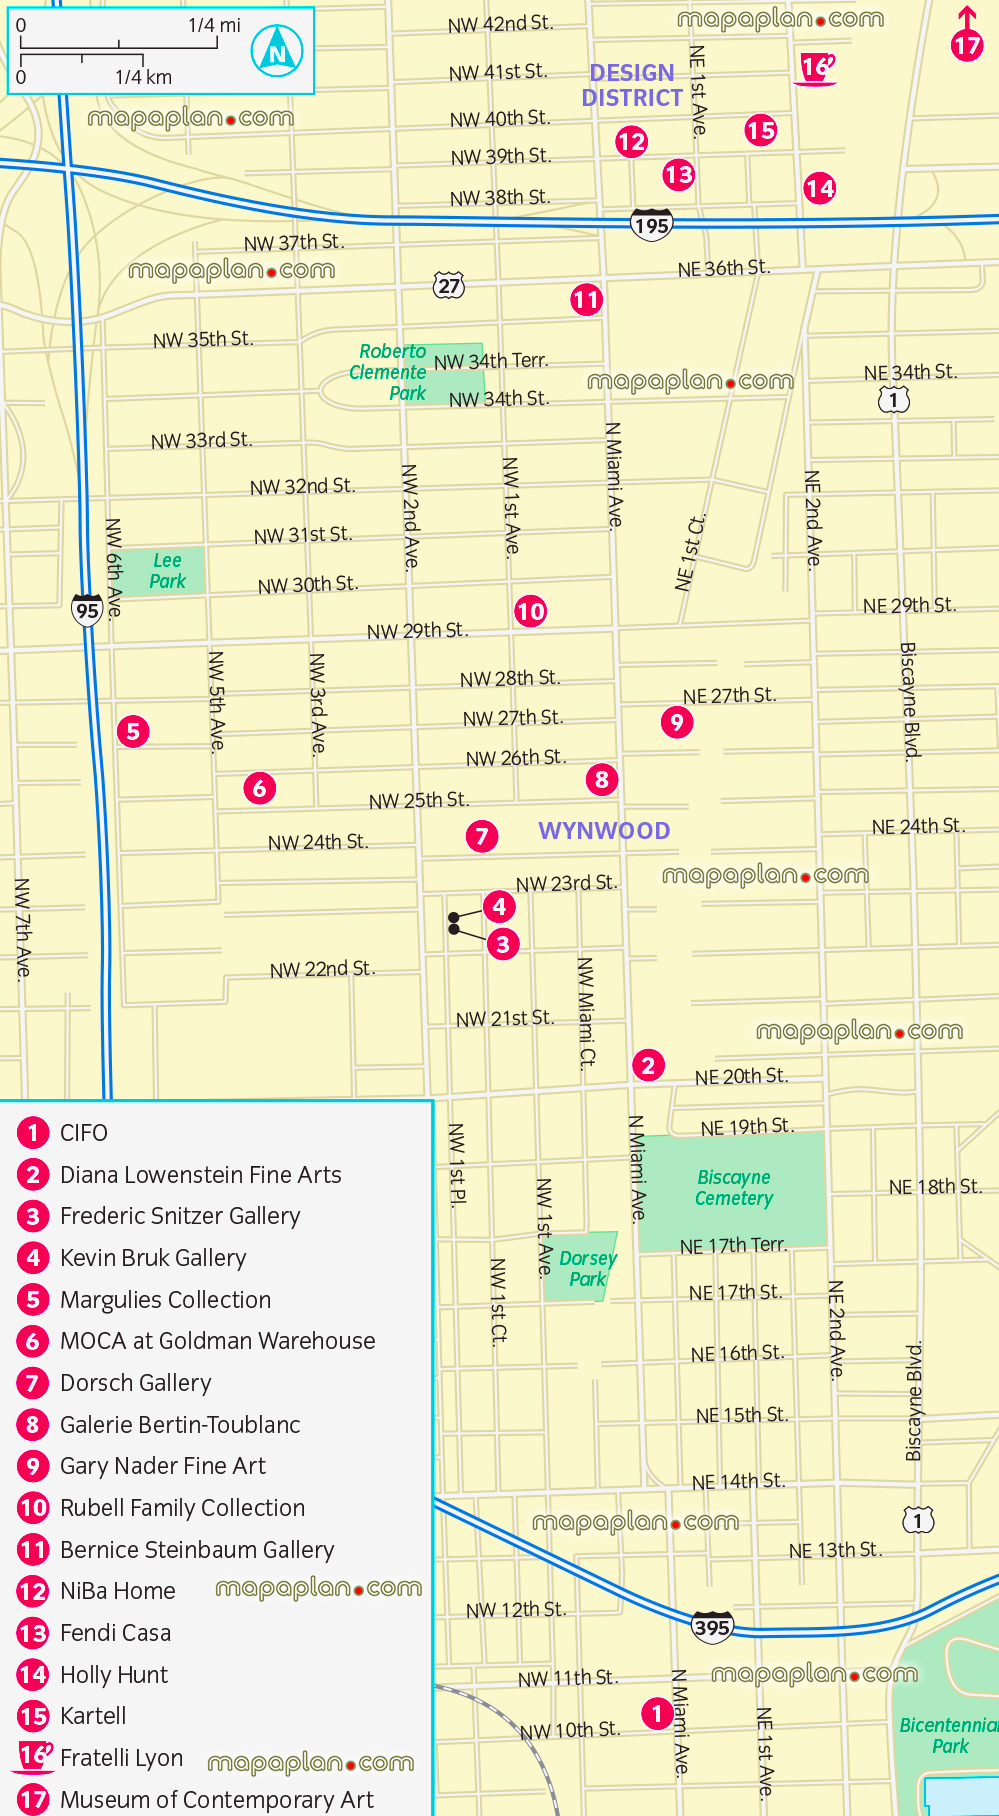 miami art district contemporary fine art collection galleries old miami visitors 3d virtual interactive printable information plan download downtown shopping destinations main points interest monuments museums landmarks destinations